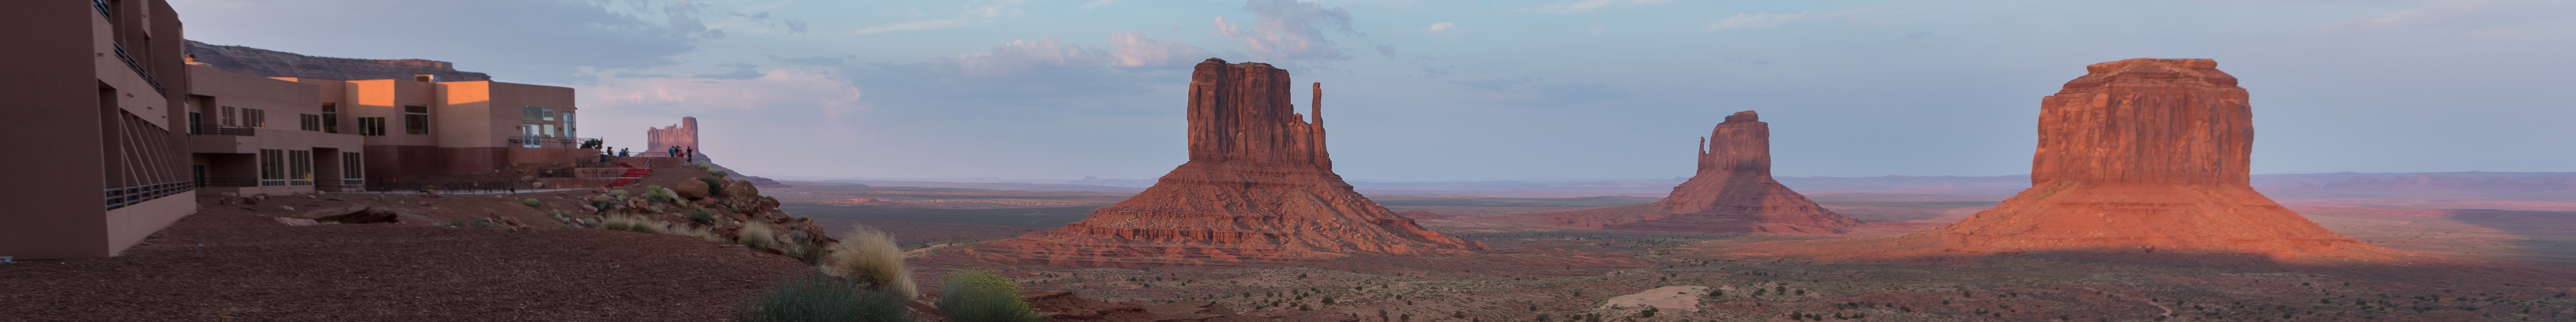 Monument Valley and View Hotel - Copyright © 2017 Dave Watkins